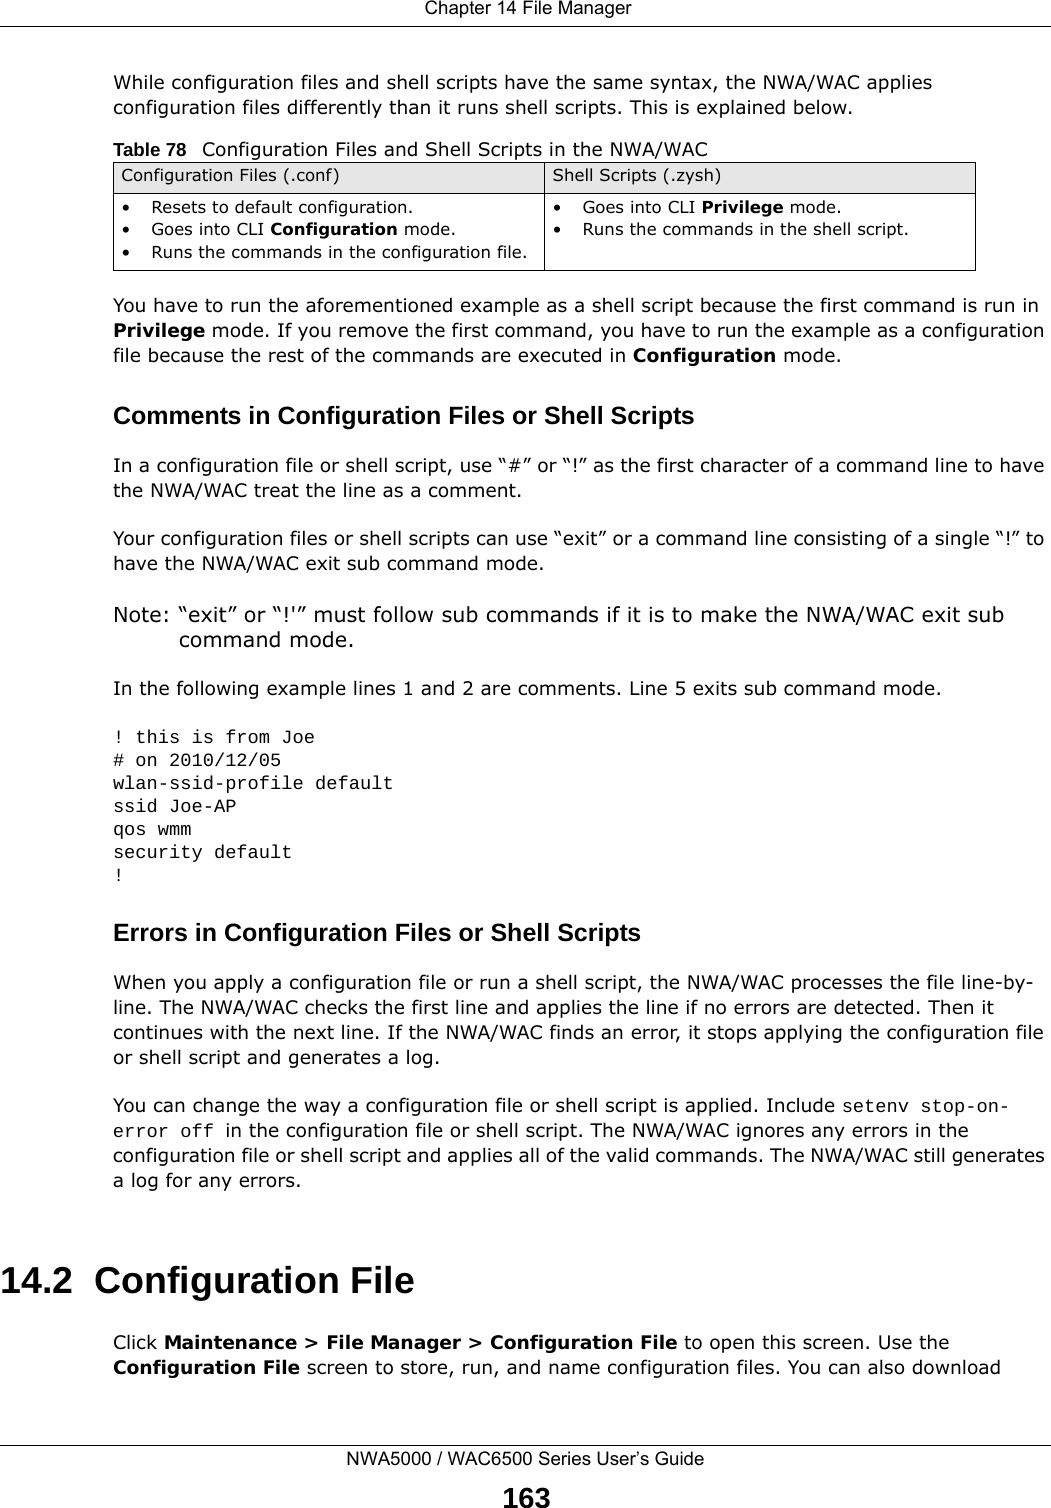  Chapter 14 File ManagerNWA5000 / WAC6500 Series User’s Guide163While configuration files and shell scripts have the same syntax, the NWA/WAC applies configuration files differently than it runs shell scripts. This is explained below.You have to run the aforementioned example as a shell script because the first command is run in Privilege mode. If you remove the first command, you have to run the example as a configuration file because the rest of the commands are executed in Configuration mode.Comments in Configuration Files or Shell ScriptsIn a configuration file or shell script, use “#” or “!” as the first character of a command line to have the NWA/WAC treat the line as a comment. Your configuration files or shell scripts can use “exit” or a command line consisting of a single “!” to have the NWA/WAC exit sub command mode.Note: “exit” or “!&apos;” must follow sub commands if it is to make the NWA/WAC exit sub command mode.In the following example lines 1 and 2 are comments. Line 5 exits sub command mode. ! this is from Joe# on 2010/12/05wlan-ssid-profile defaultssid Joe-APqos wmmsecurity default!Errors in Configuration Files or Shell ScriptsWhen you apply a configuration file or run a shell script, the NWA/WAC processes the file line-by-line. The NWA/WAC checks the first line and applies the line if no errors are detected. Then it continues with the next line. If the NWA/WAC finds an error, it stops applying the configuration file or shell script and generates a log. You can change the way a configuration file or shell script is applied. Include setenv stop-on-error off in the configuration file or shell script. The NWA/WAC ignores any errors in the configuration file or shell script and applies all of the valid commands. The NWA/WAC still generates a log for any errors. 14.2  Configuration FileClick Maintenance &gt; File Manager &gt; Configuration File to open this screen. Use the Configuration File screen to store, run, and name configuration files. You can also download Table 78   Configuration Files and Shell Scripts in the NWA/WACConfiguration Files (.conf) Shell Scripts (.zysh)• Resets to default configuration.•Goes into CLI Configuration mode.• Runs the commands in the configuration file.•Goes into CLI Privilege mode.• Runs the commands in the shell script.